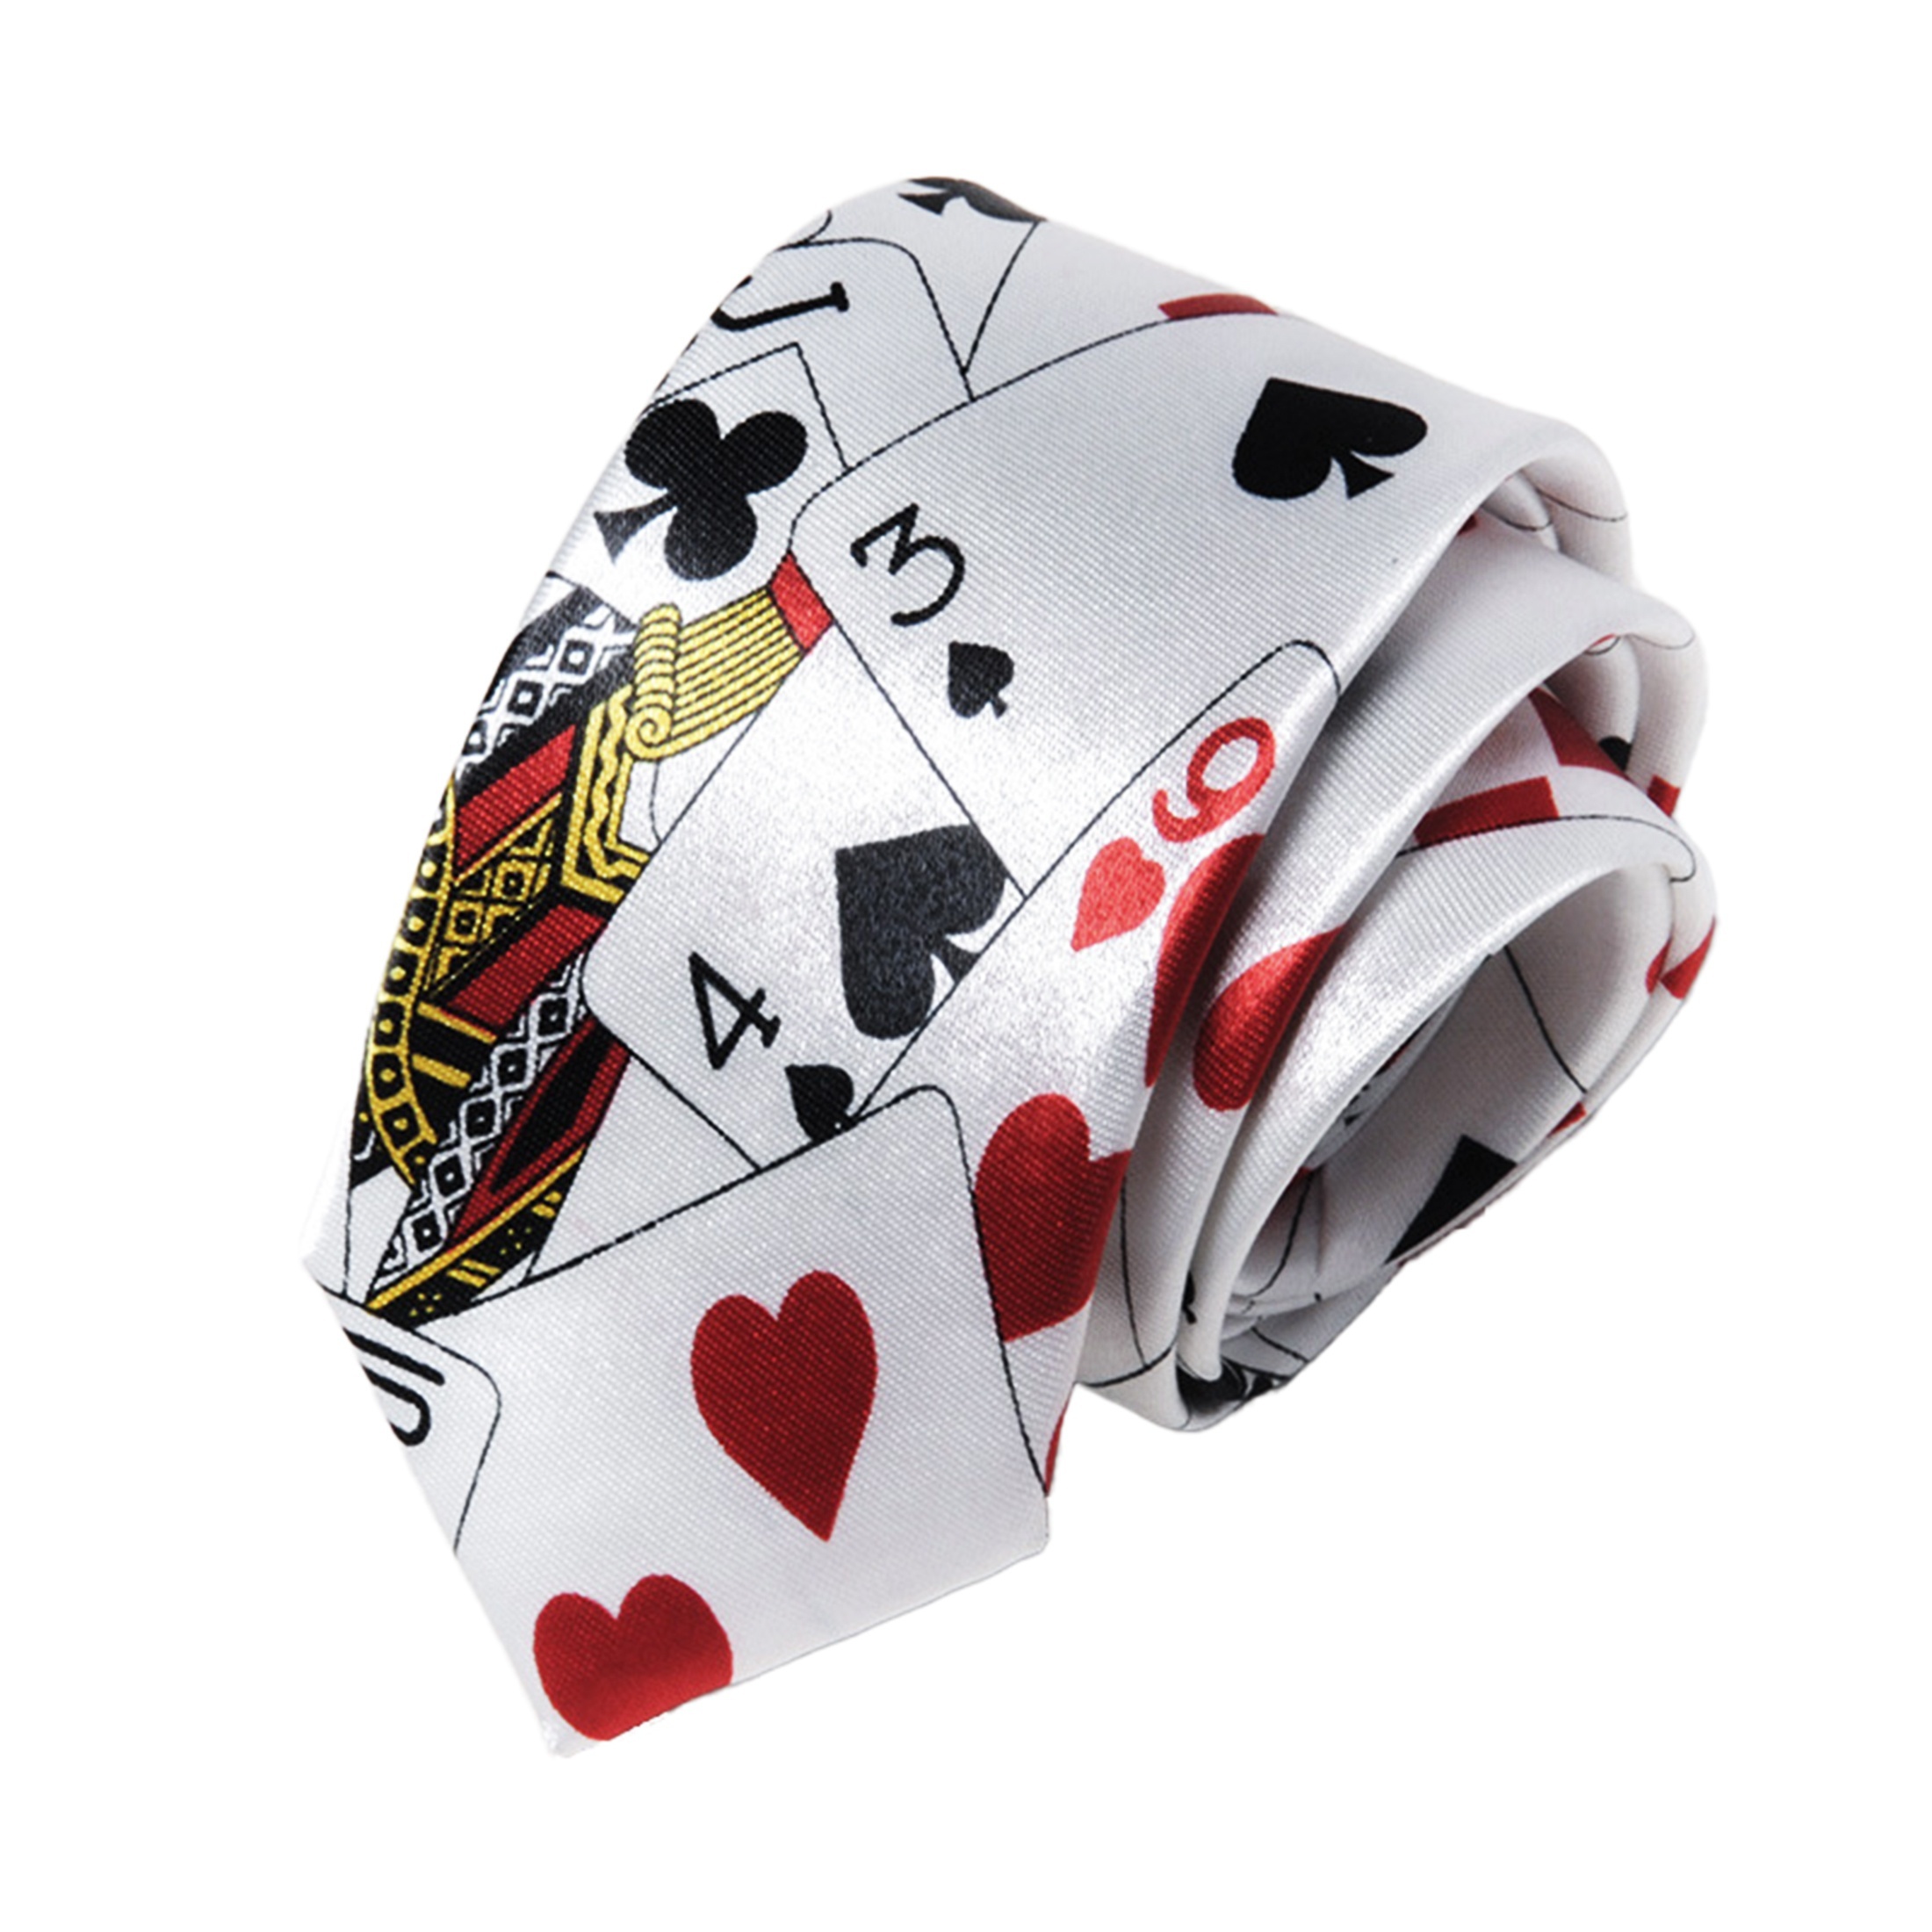 

Printed Tie With Playing Card Pattern - Unisex, Suitable For Holiday Parties Or Daily Wear